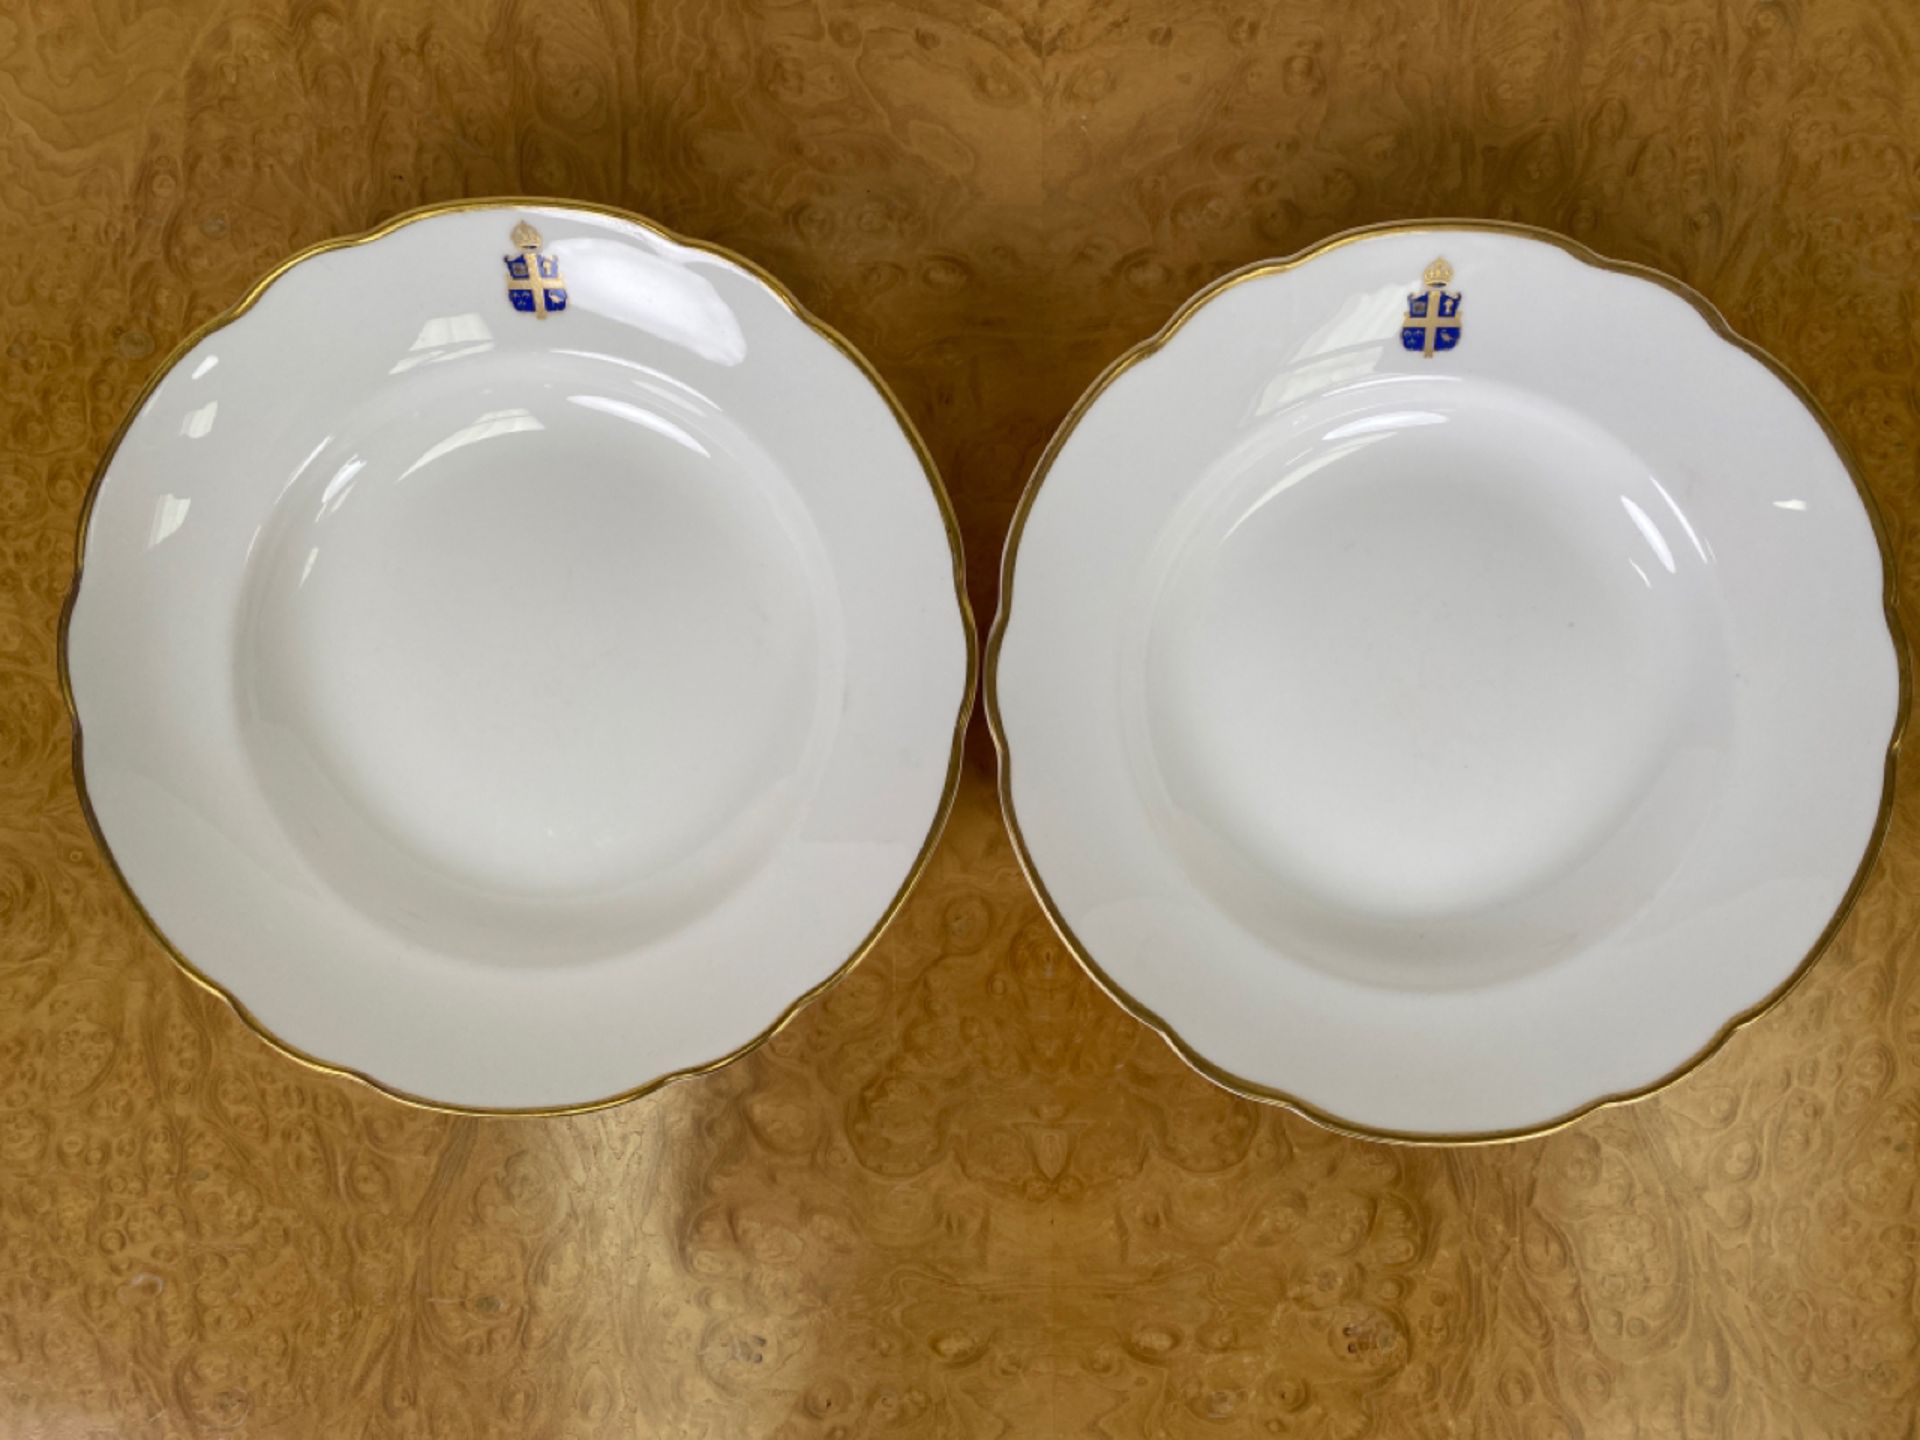 Set of Crested Crockery for Claridge's by Chommette 1884 - Image 26 of 31